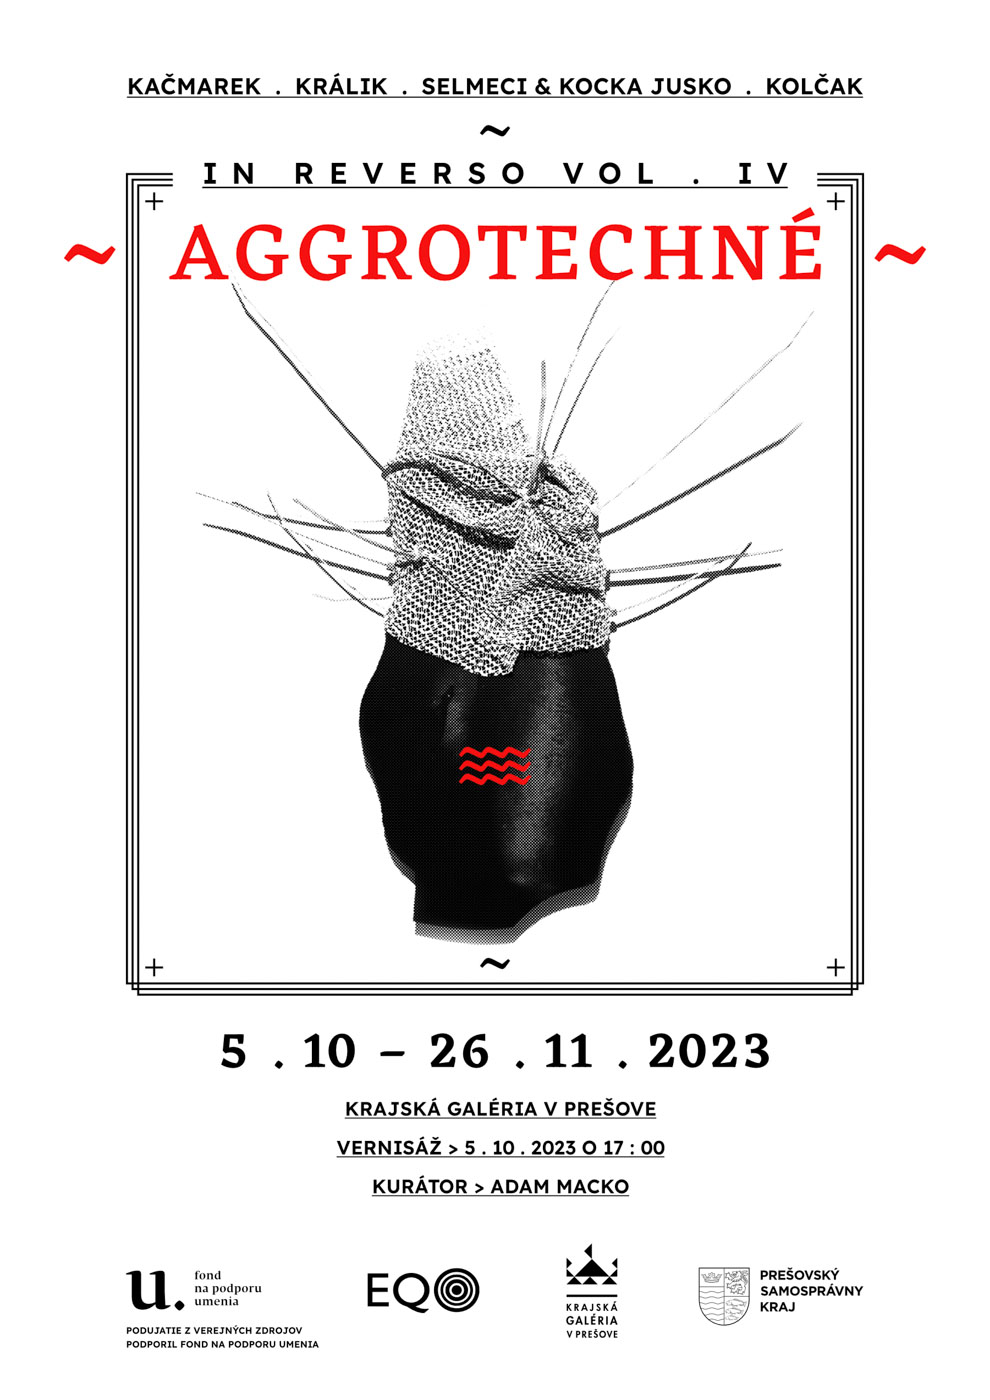 In Reverso vol. IV: AGGROTECHNÉ